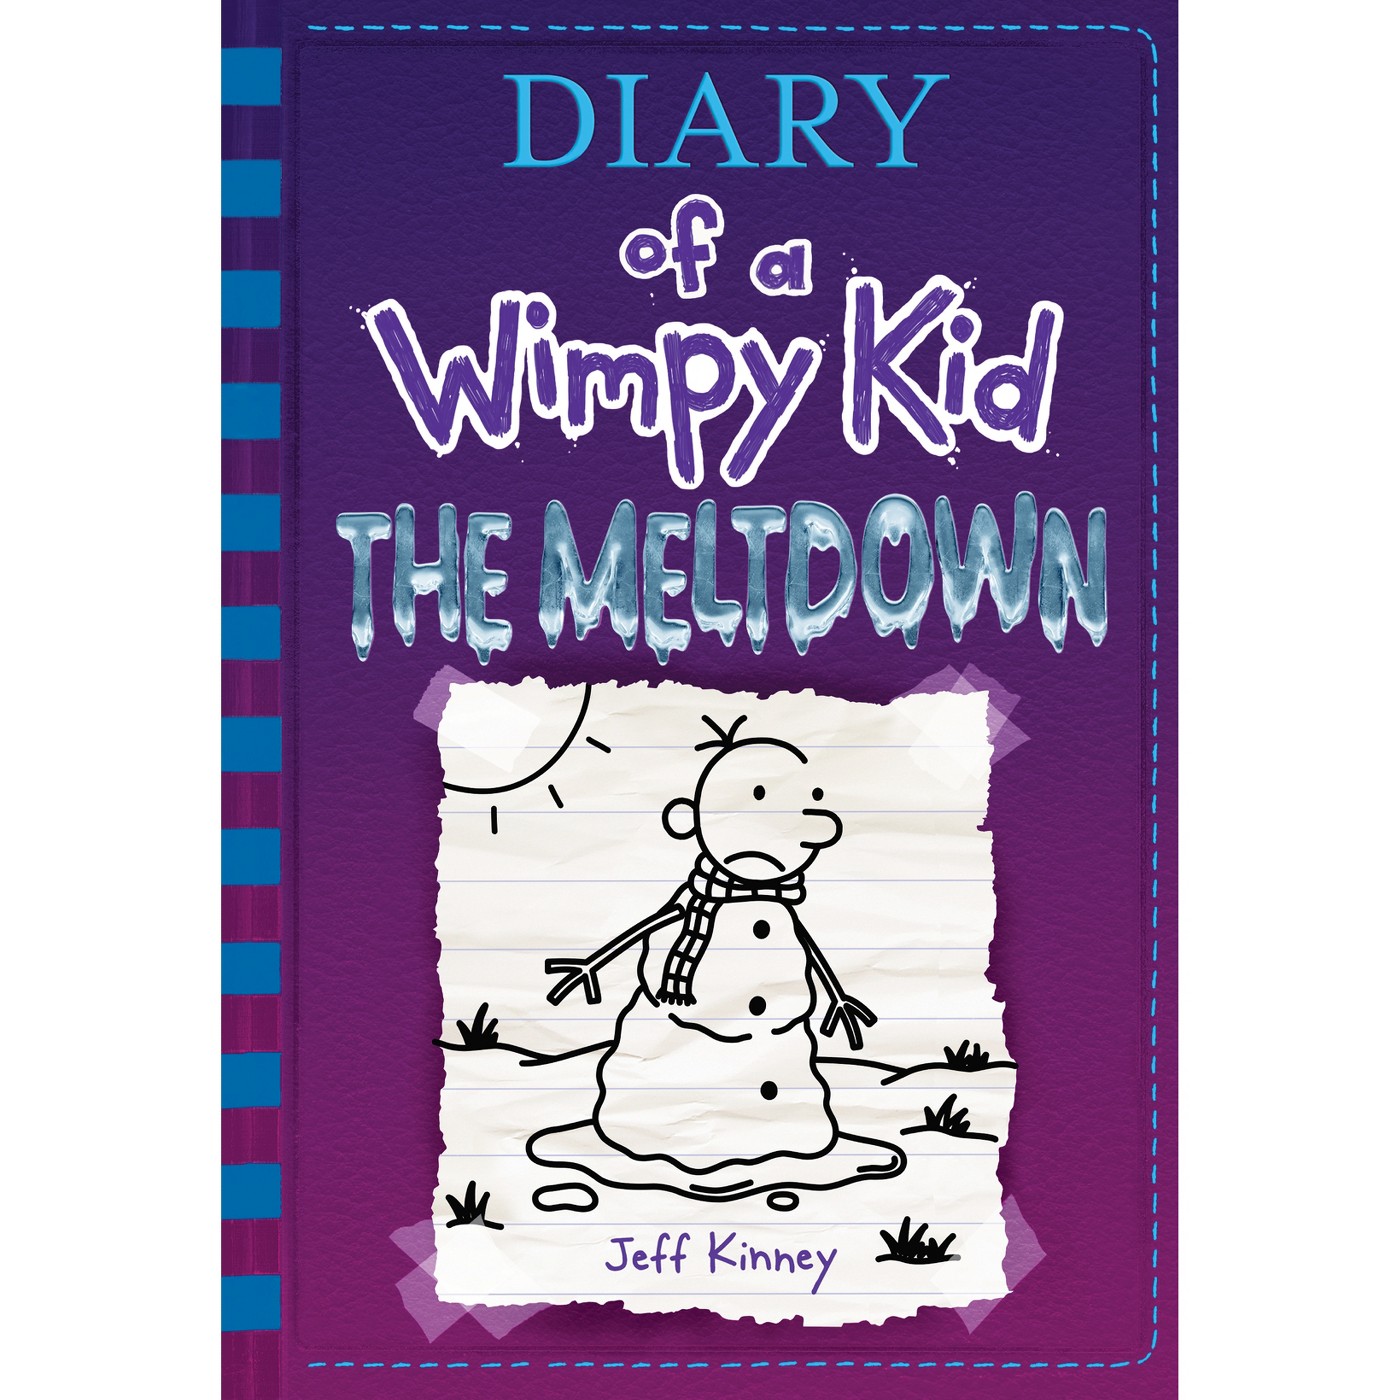 Meltdown -  (Diary of a Wimpy Kid) by Jeff Kinney (Hardcover) - image 1 of 1